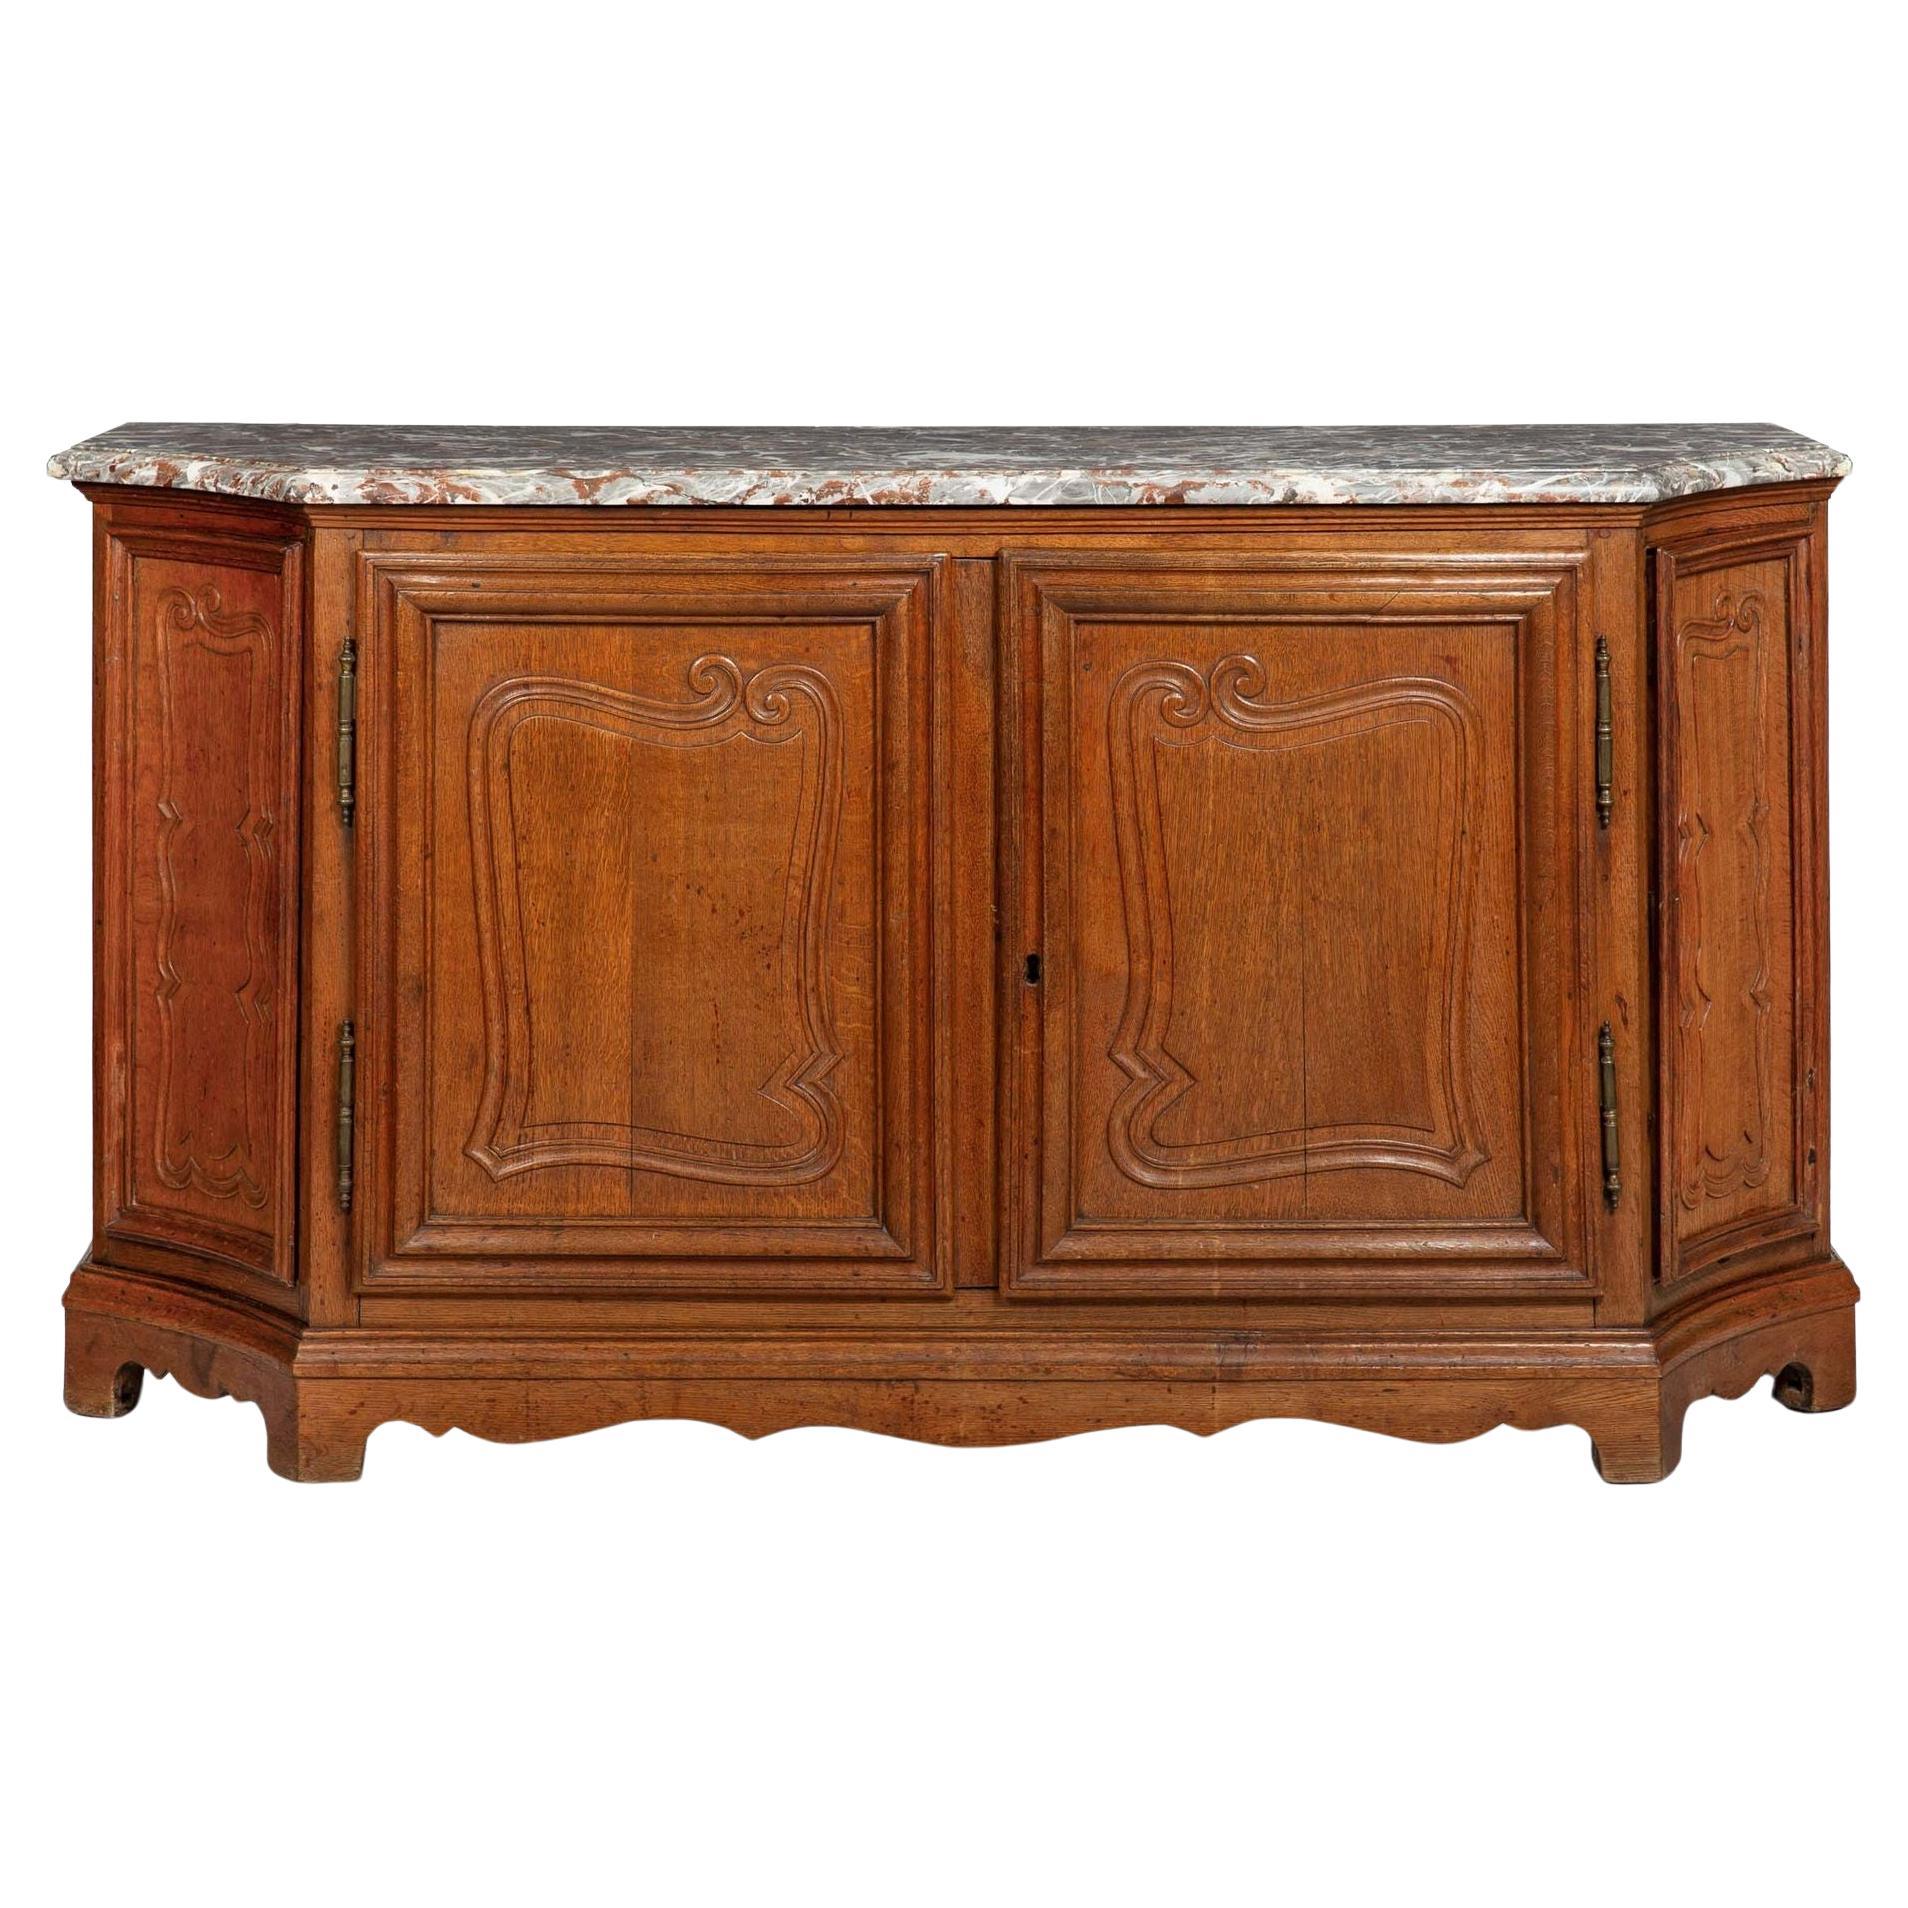 French Provincial Antique Oak and Marble Buffet Sideboard Cabinet ca. 1880 For Sale